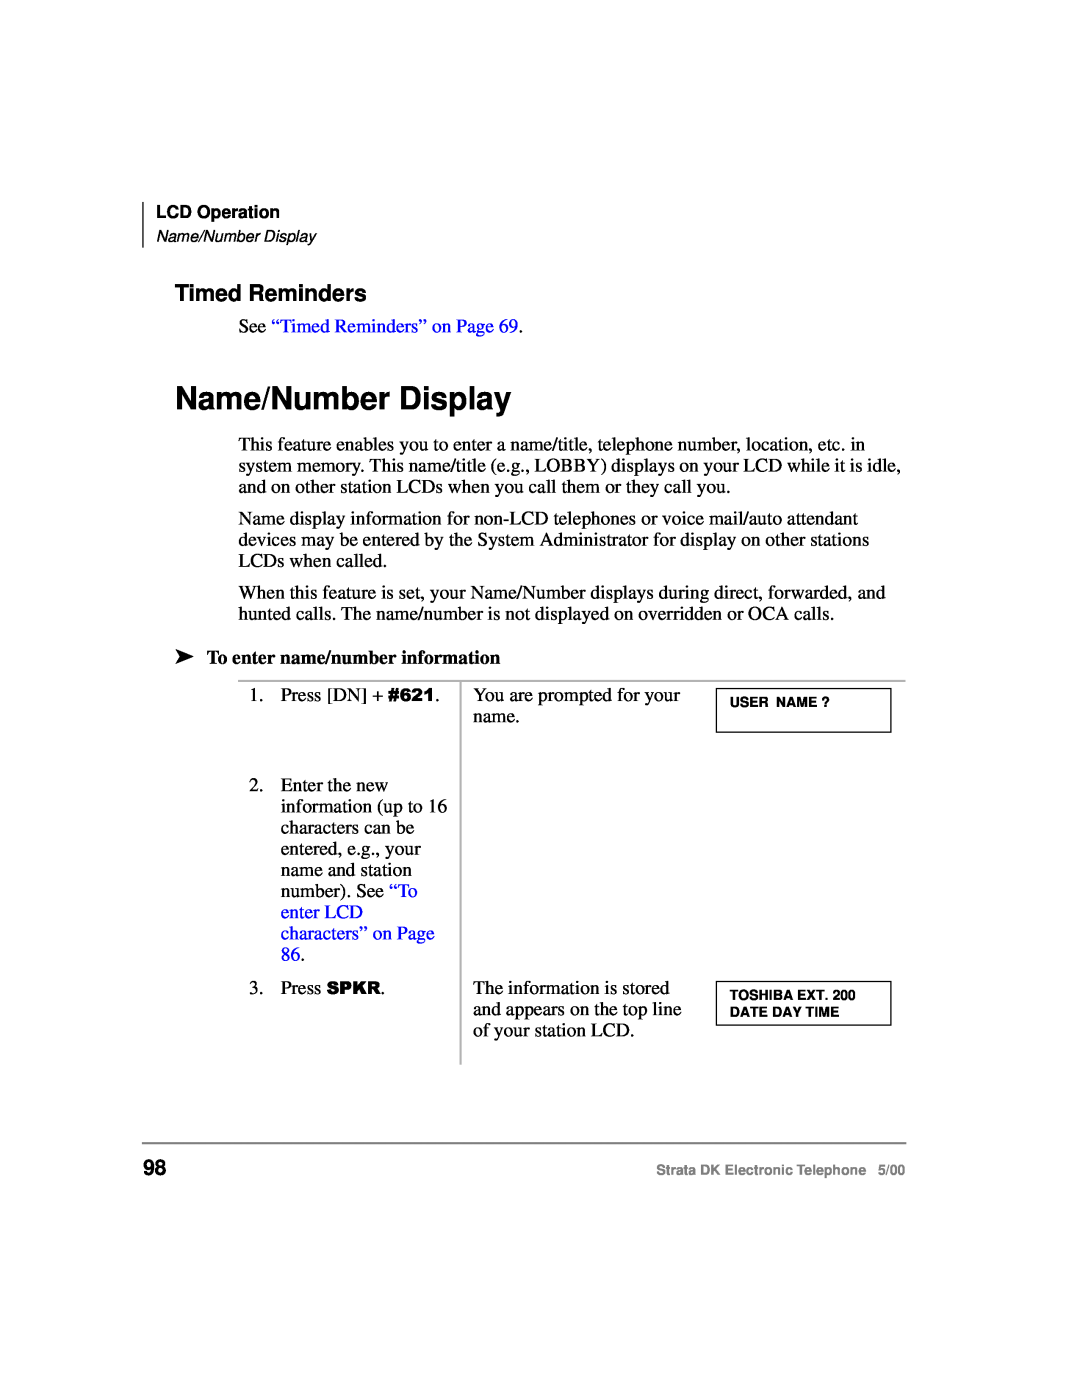 Toshiba Strata DK manual Name/Number Display, See “Timed Reminders” on Page, To enter name/number information 